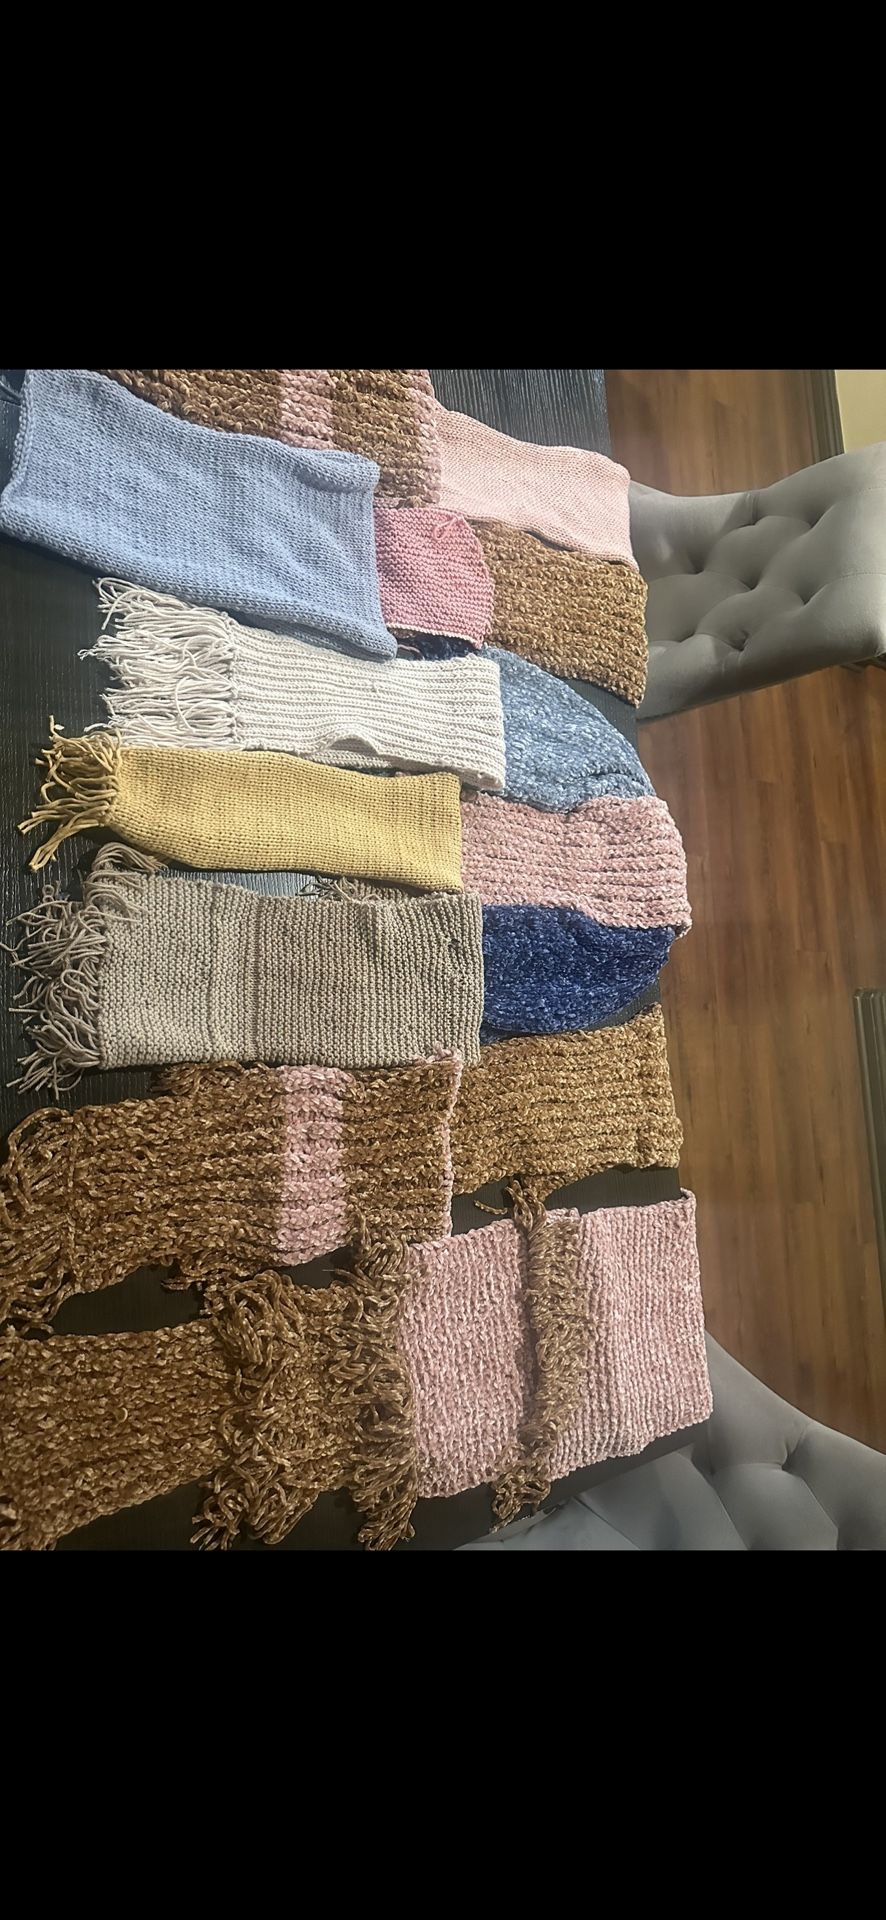 Hand made scarfs and hats.